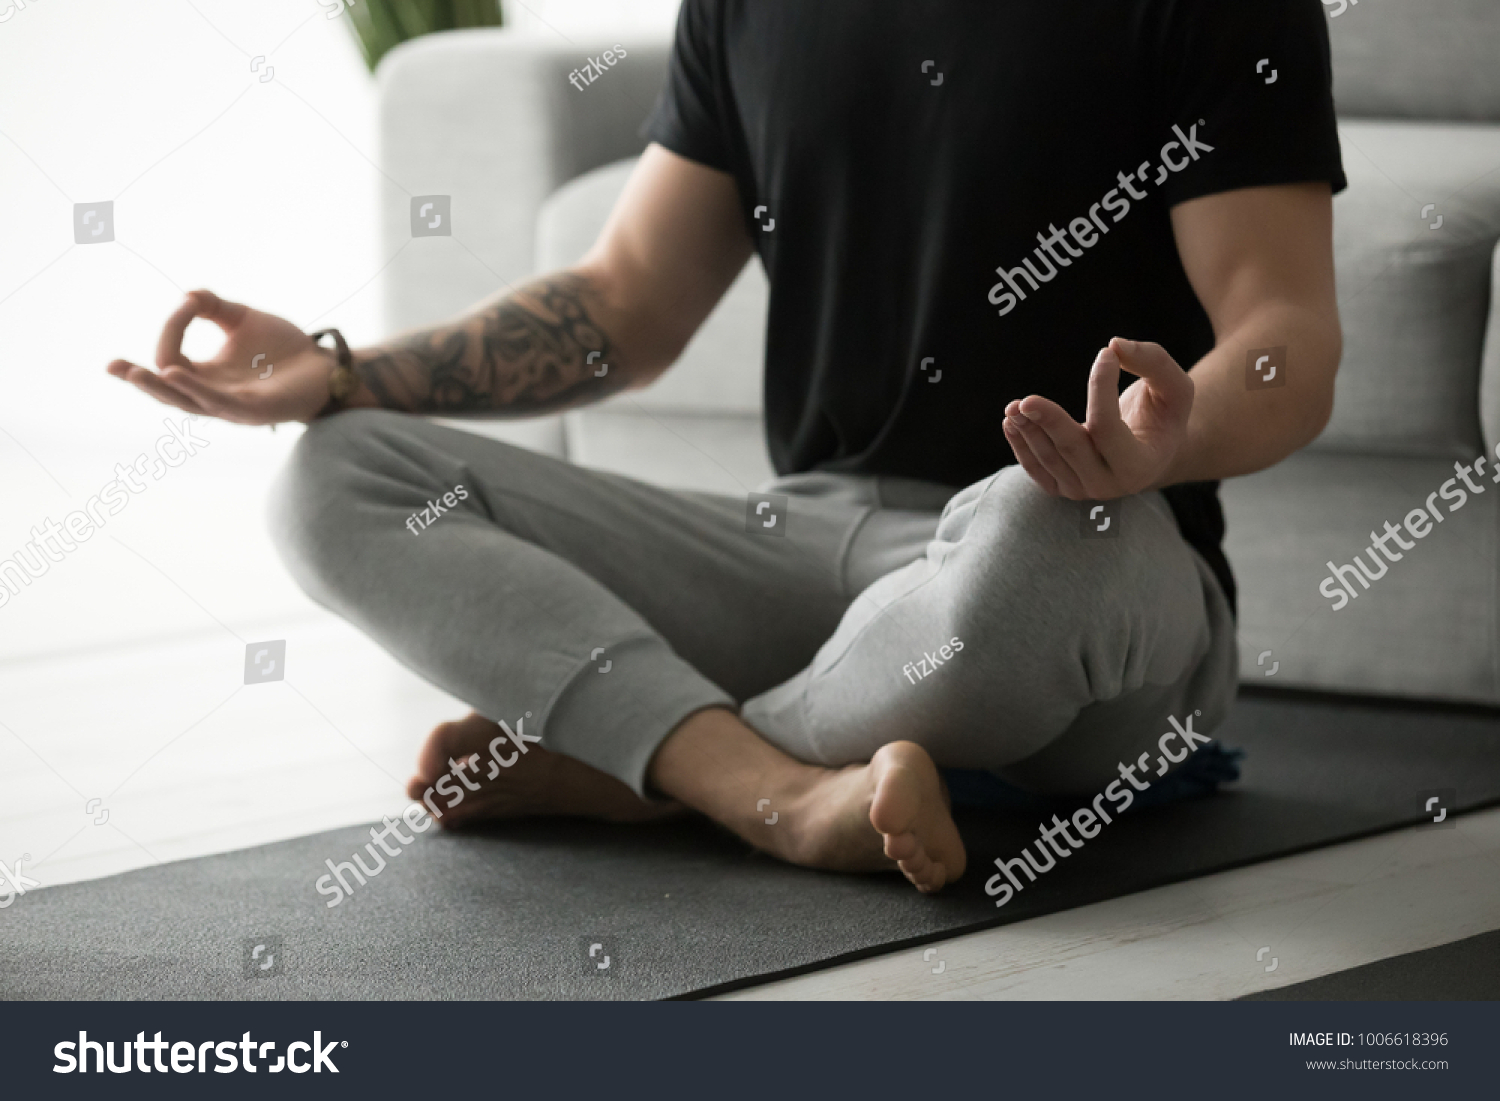 Sporty mindful man with tattoo meditating alone at home, peaceful calm hipster fit guy practicing yoga in lotus pose indoors holding hands in mudra, freedom and calmness concept, close up view #1006618396